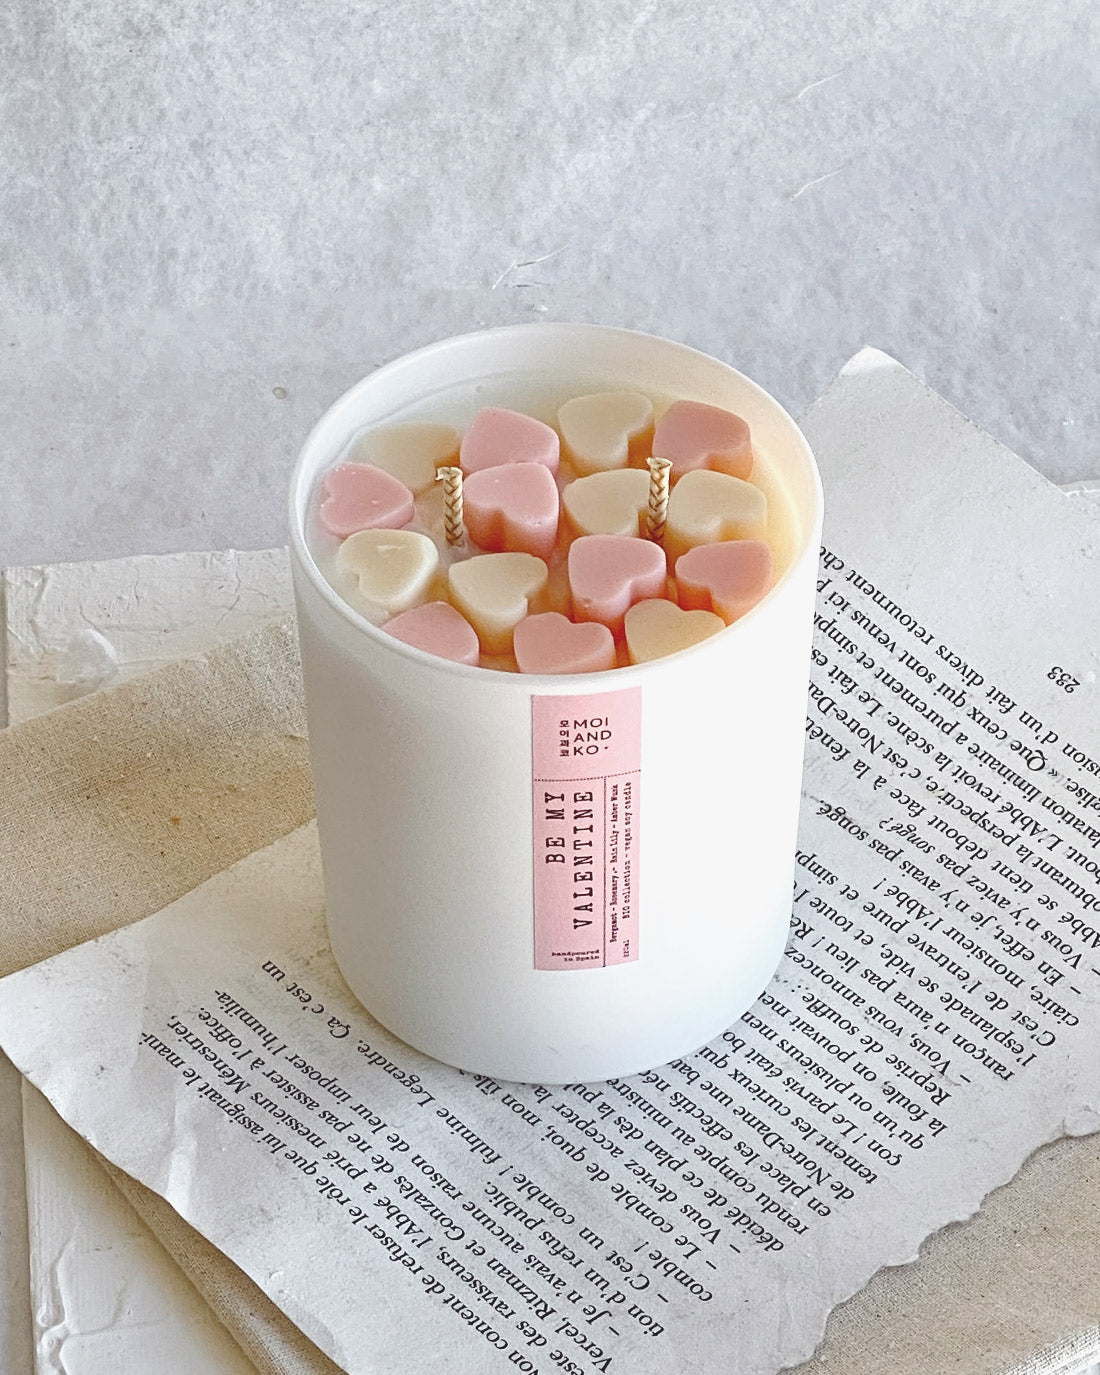 Valentine's day, Heart shaped Cube candle, Pillar candle, Soy candle